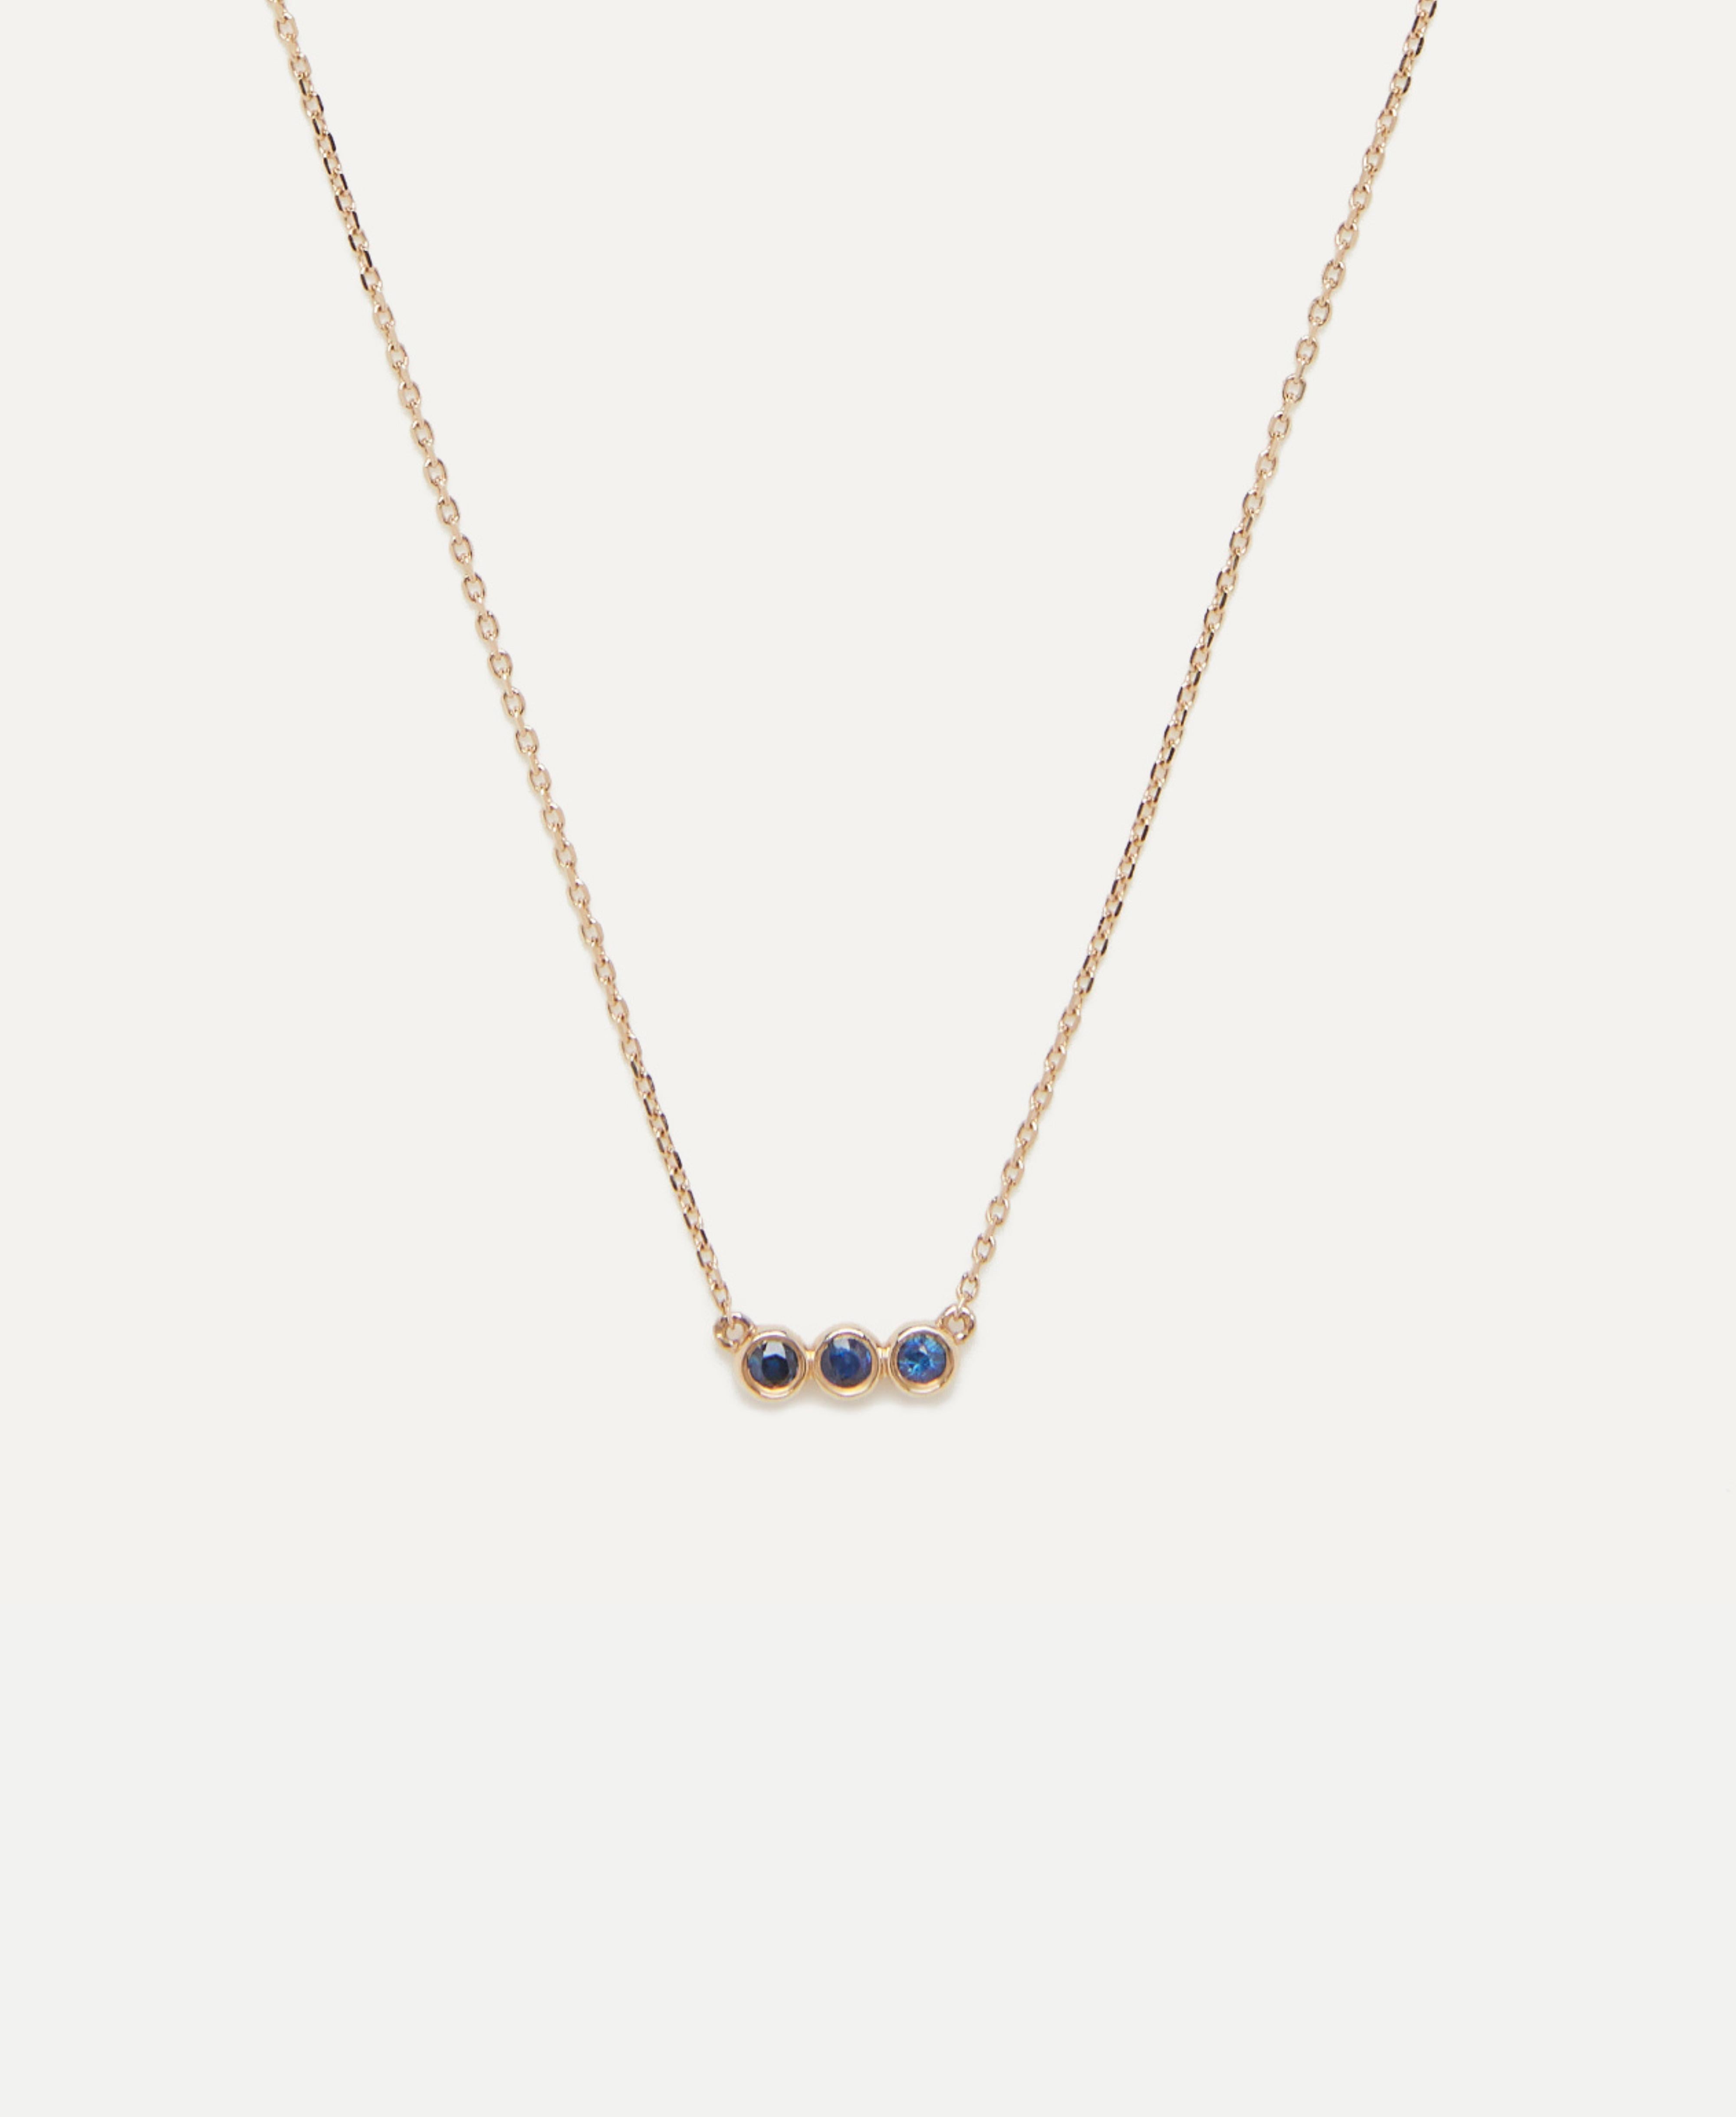 A Sapphire Trio Pendant Necklace is a symbol of timeless beauty and sentimental significance. This necklace features a delicate pendant adorned with three captivating sapphires, deep blue hued. The trio of sapphires represents the past, present, and